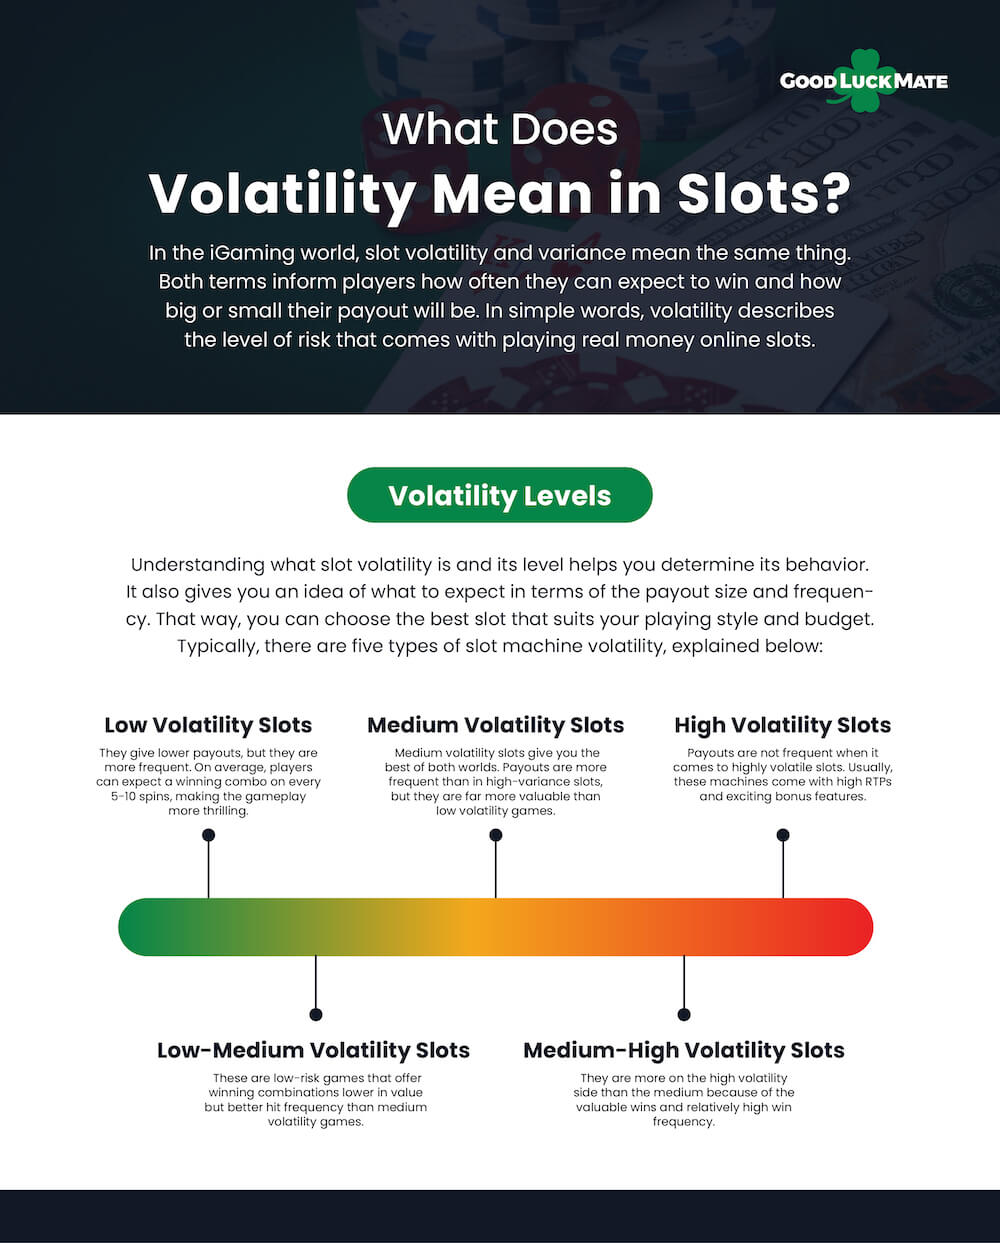 How does the volatility of a Slot affect gameplay?